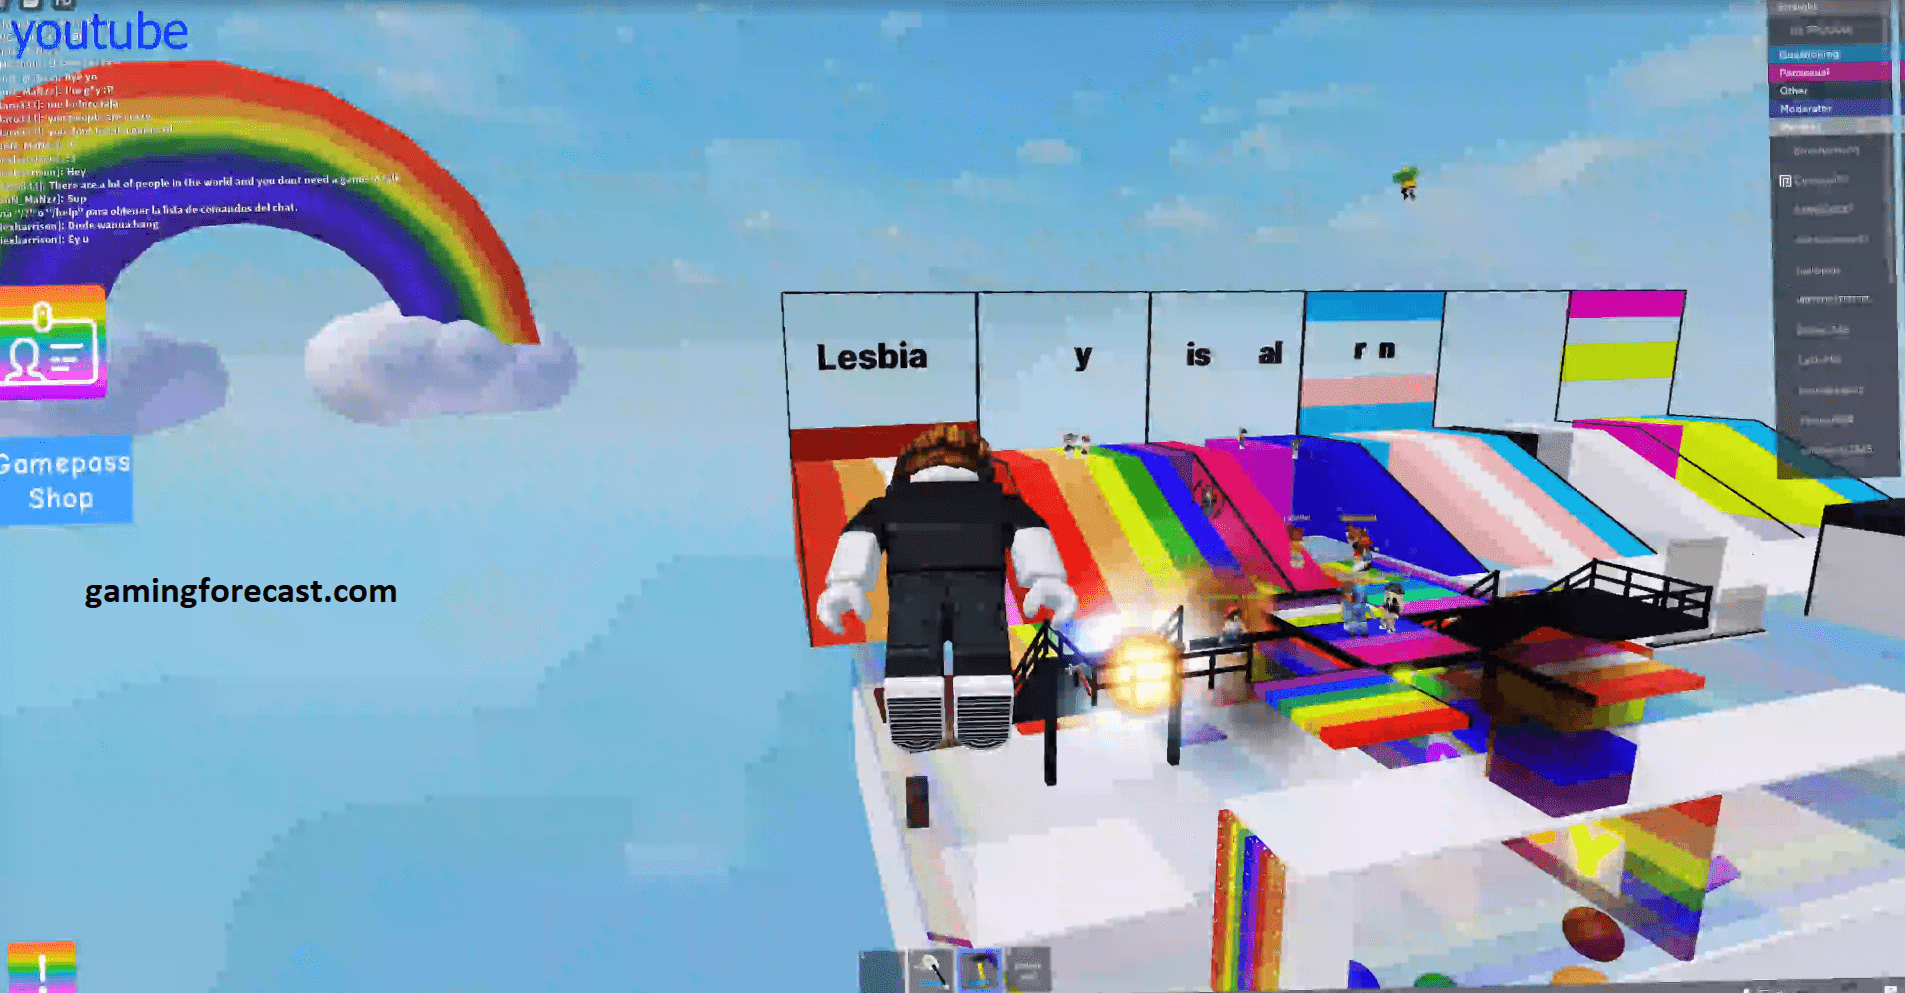 Roblox Hack Download Pc Destroy Lobby Fly Aimbot Scripts 2021 Gaming Forecast Download Free Online Game Hacks - roblox dll exploit 2021